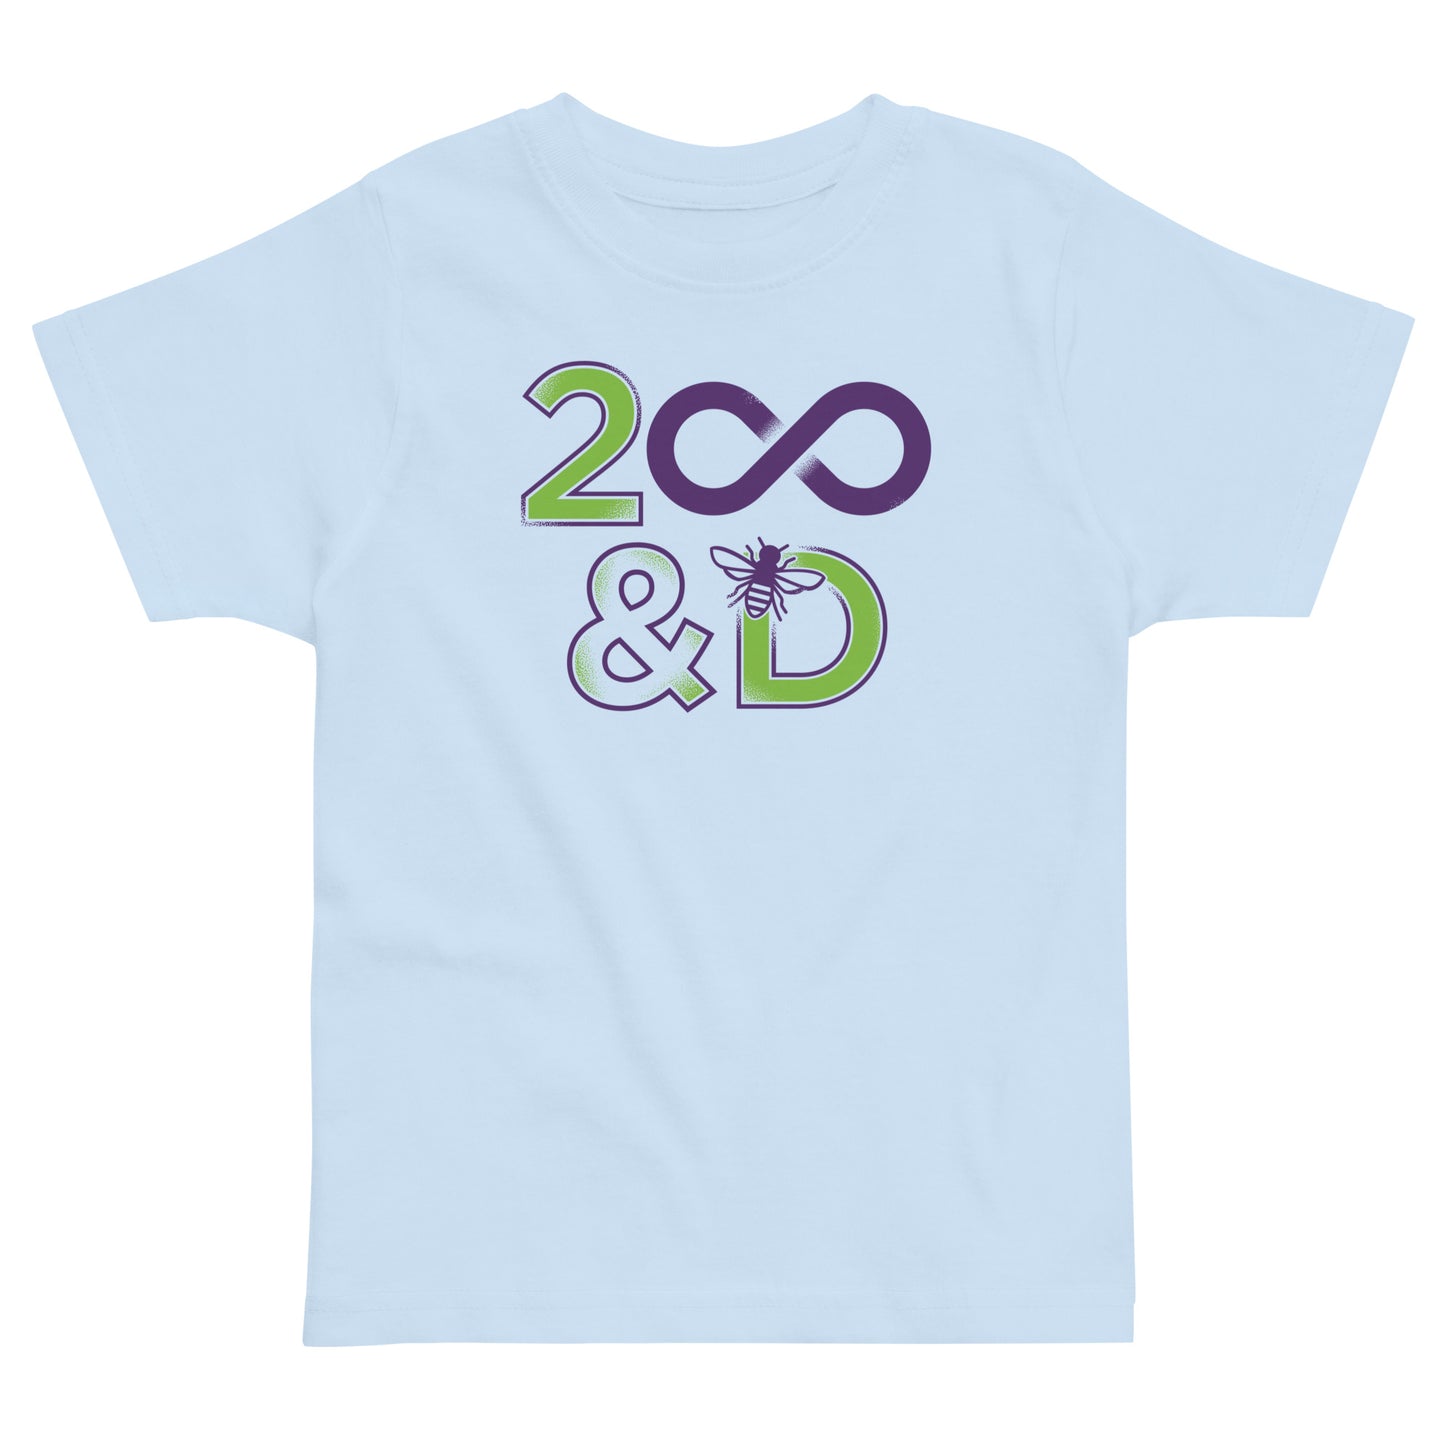 2 Infinity And B On D Kid's Toddler Tee